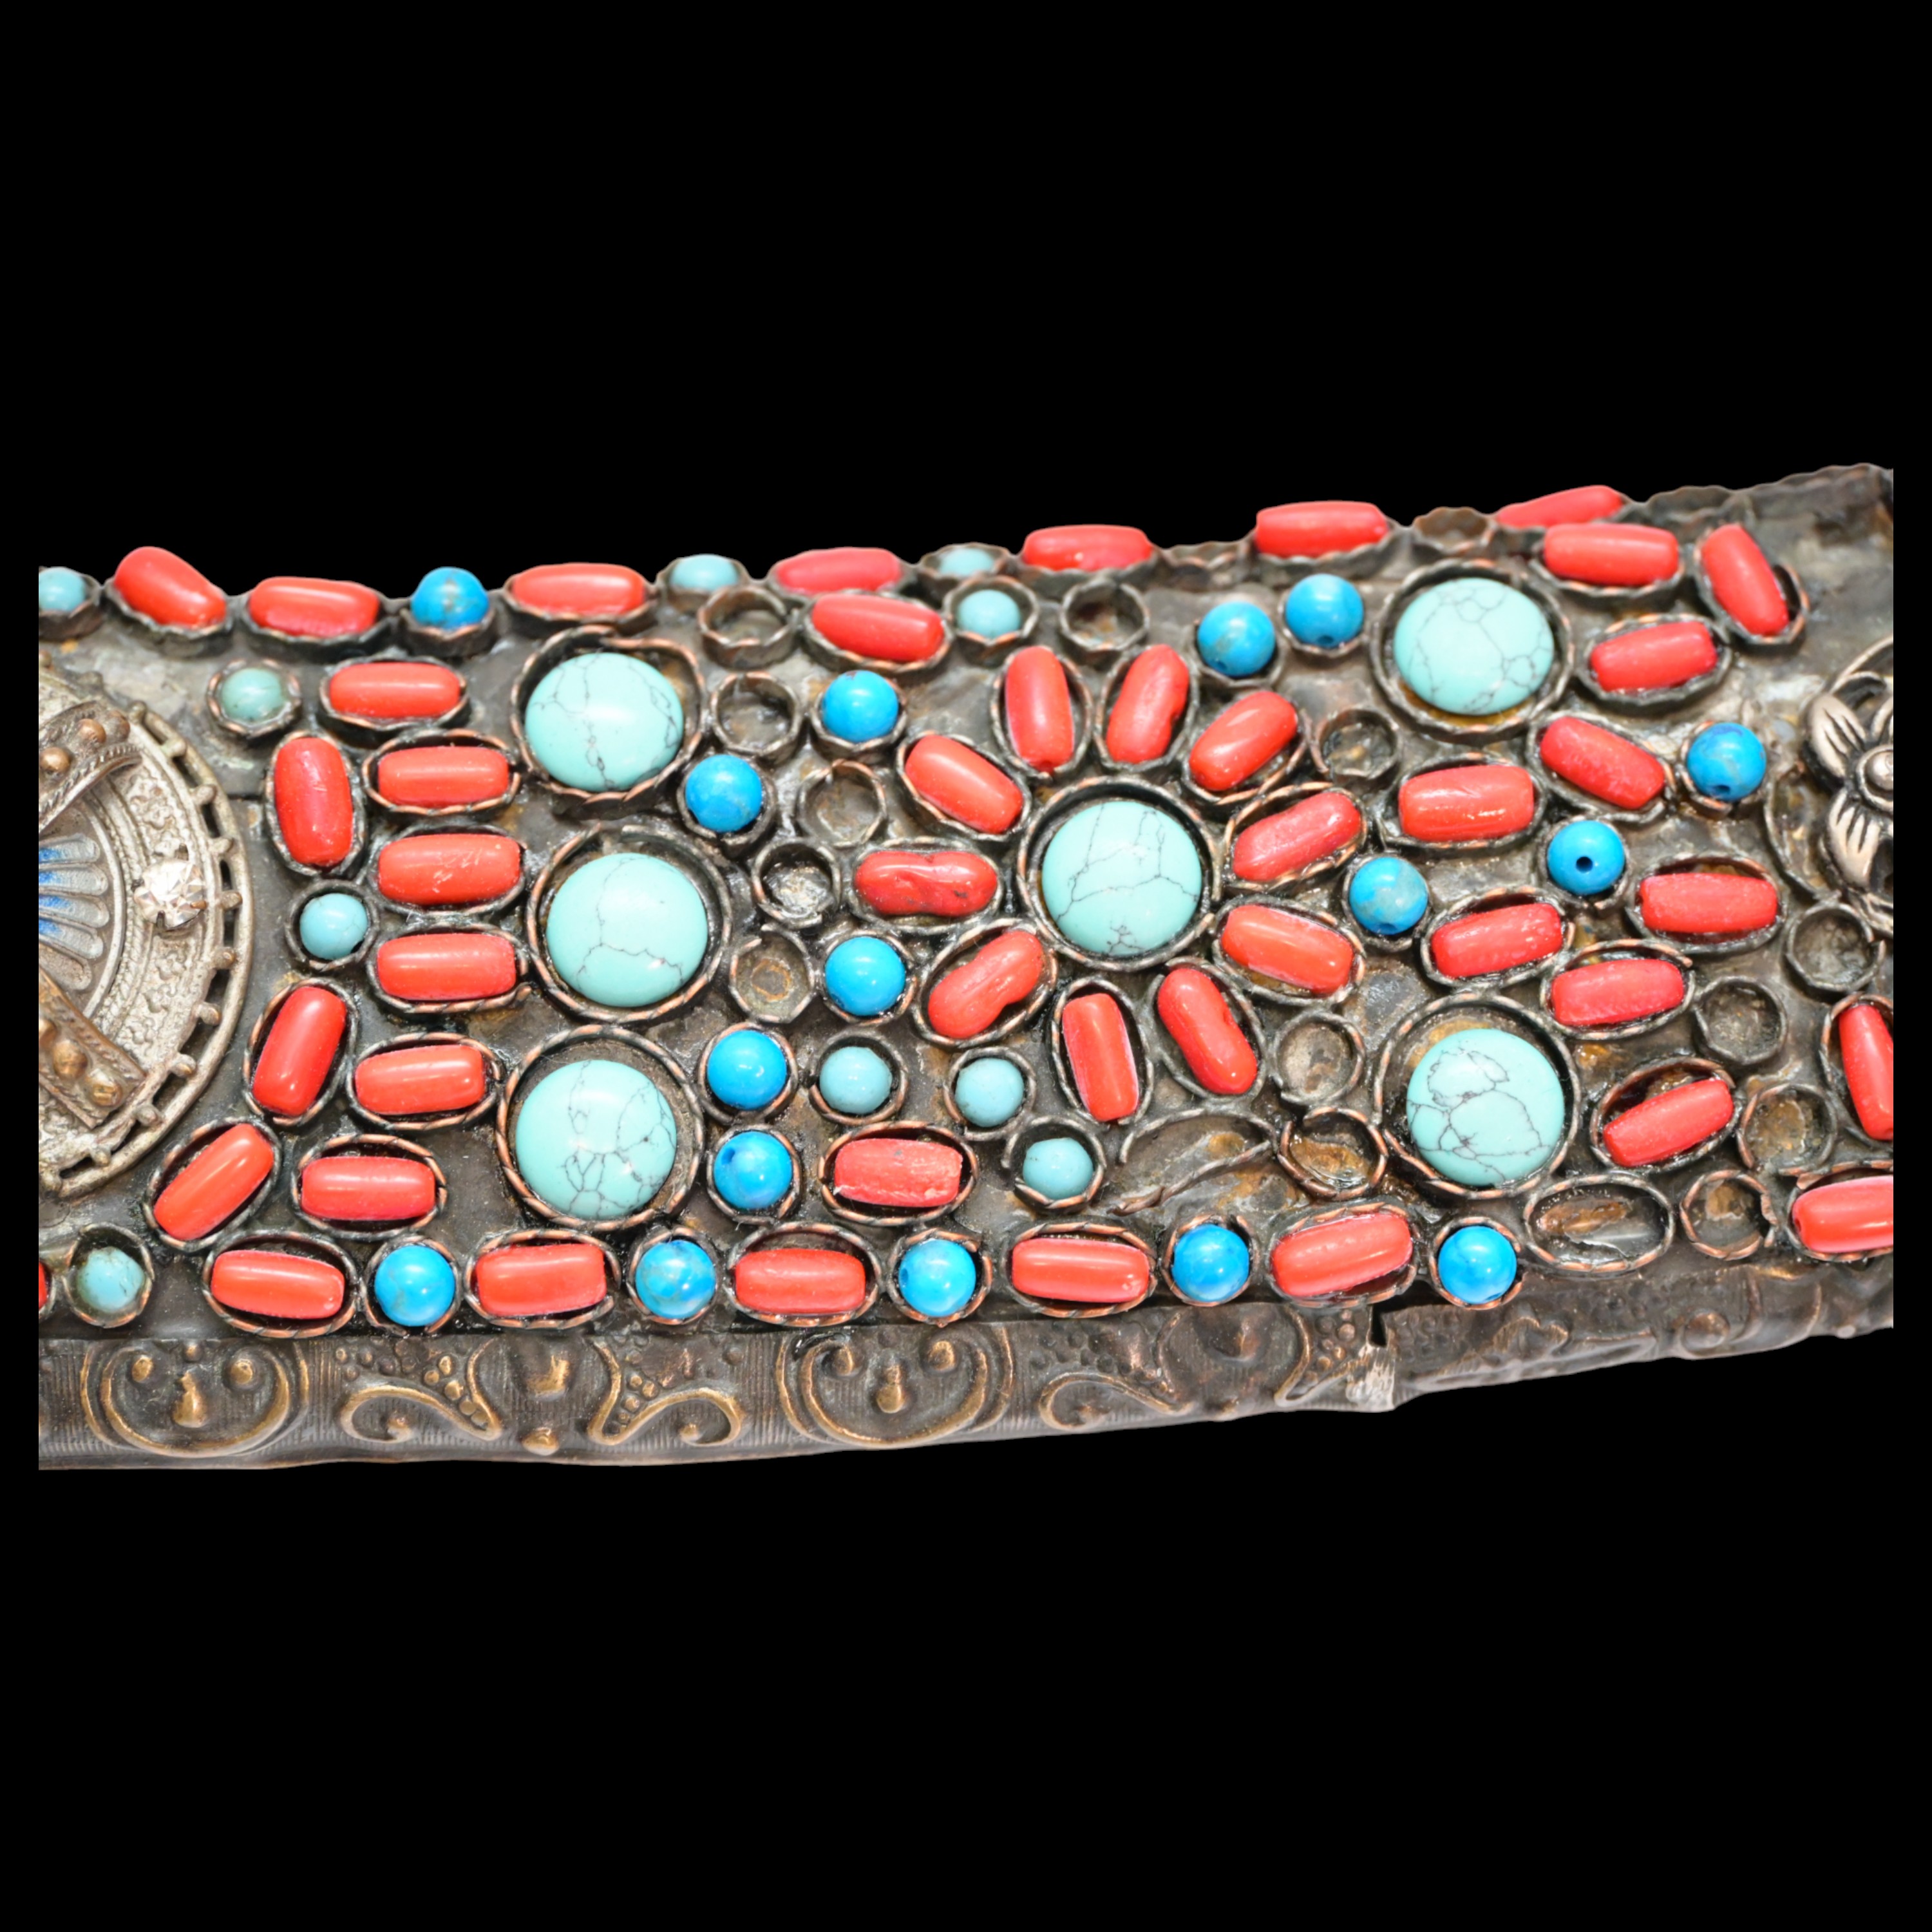 Rare Ottoman sword, Kilij, Pala, decorated with corals and turquoise, Turkey, Trabzon, around 1800. - Image 22 of 31